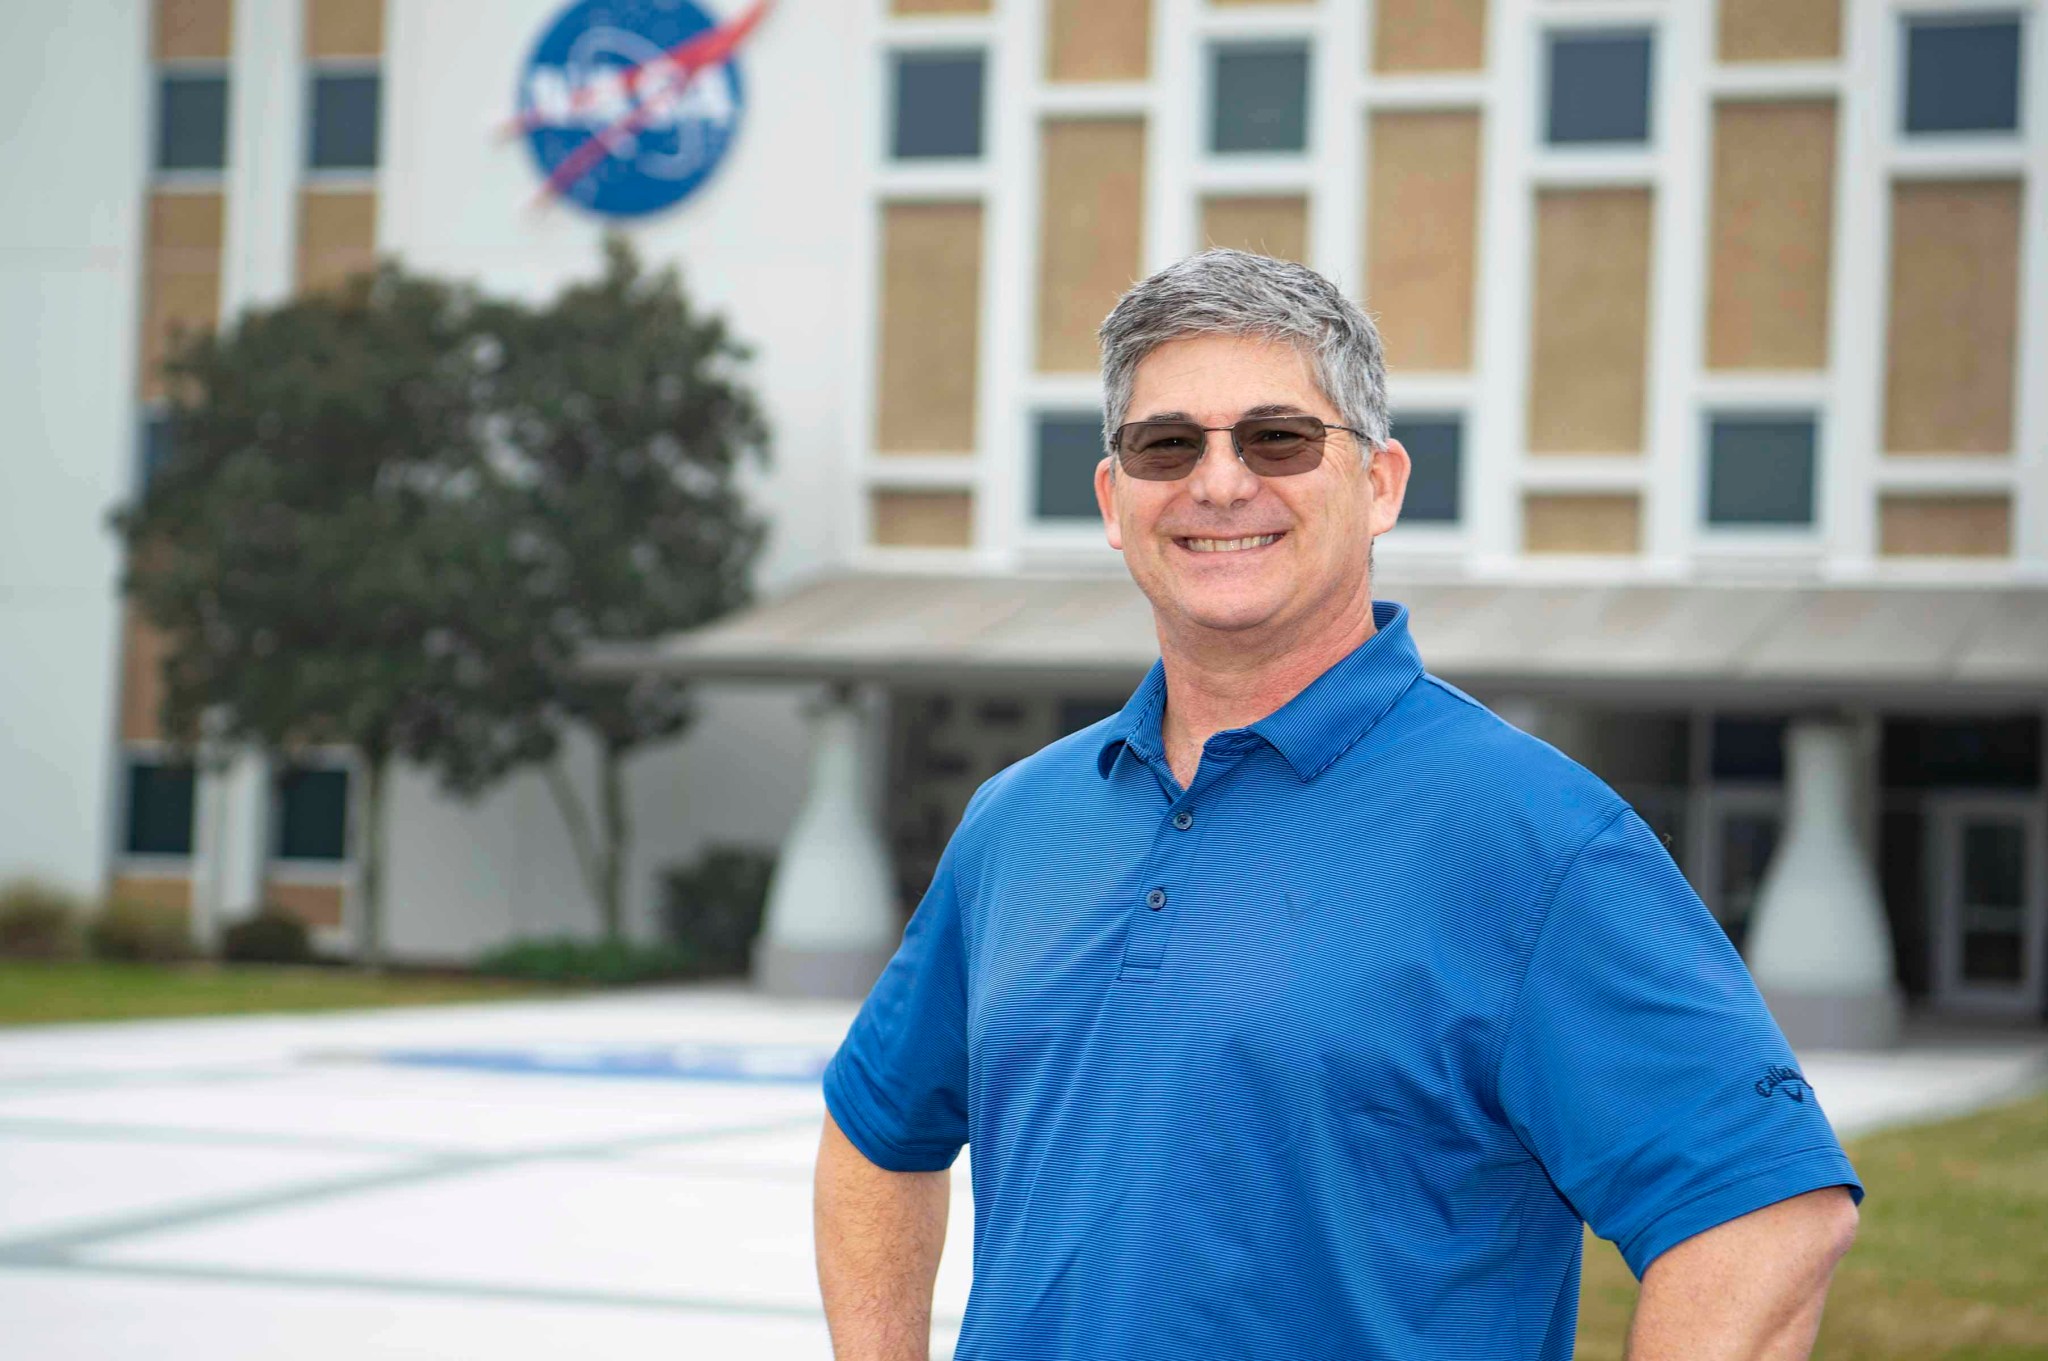 Tom Lipski stands in front of Building 1100 at Stennis Space Center